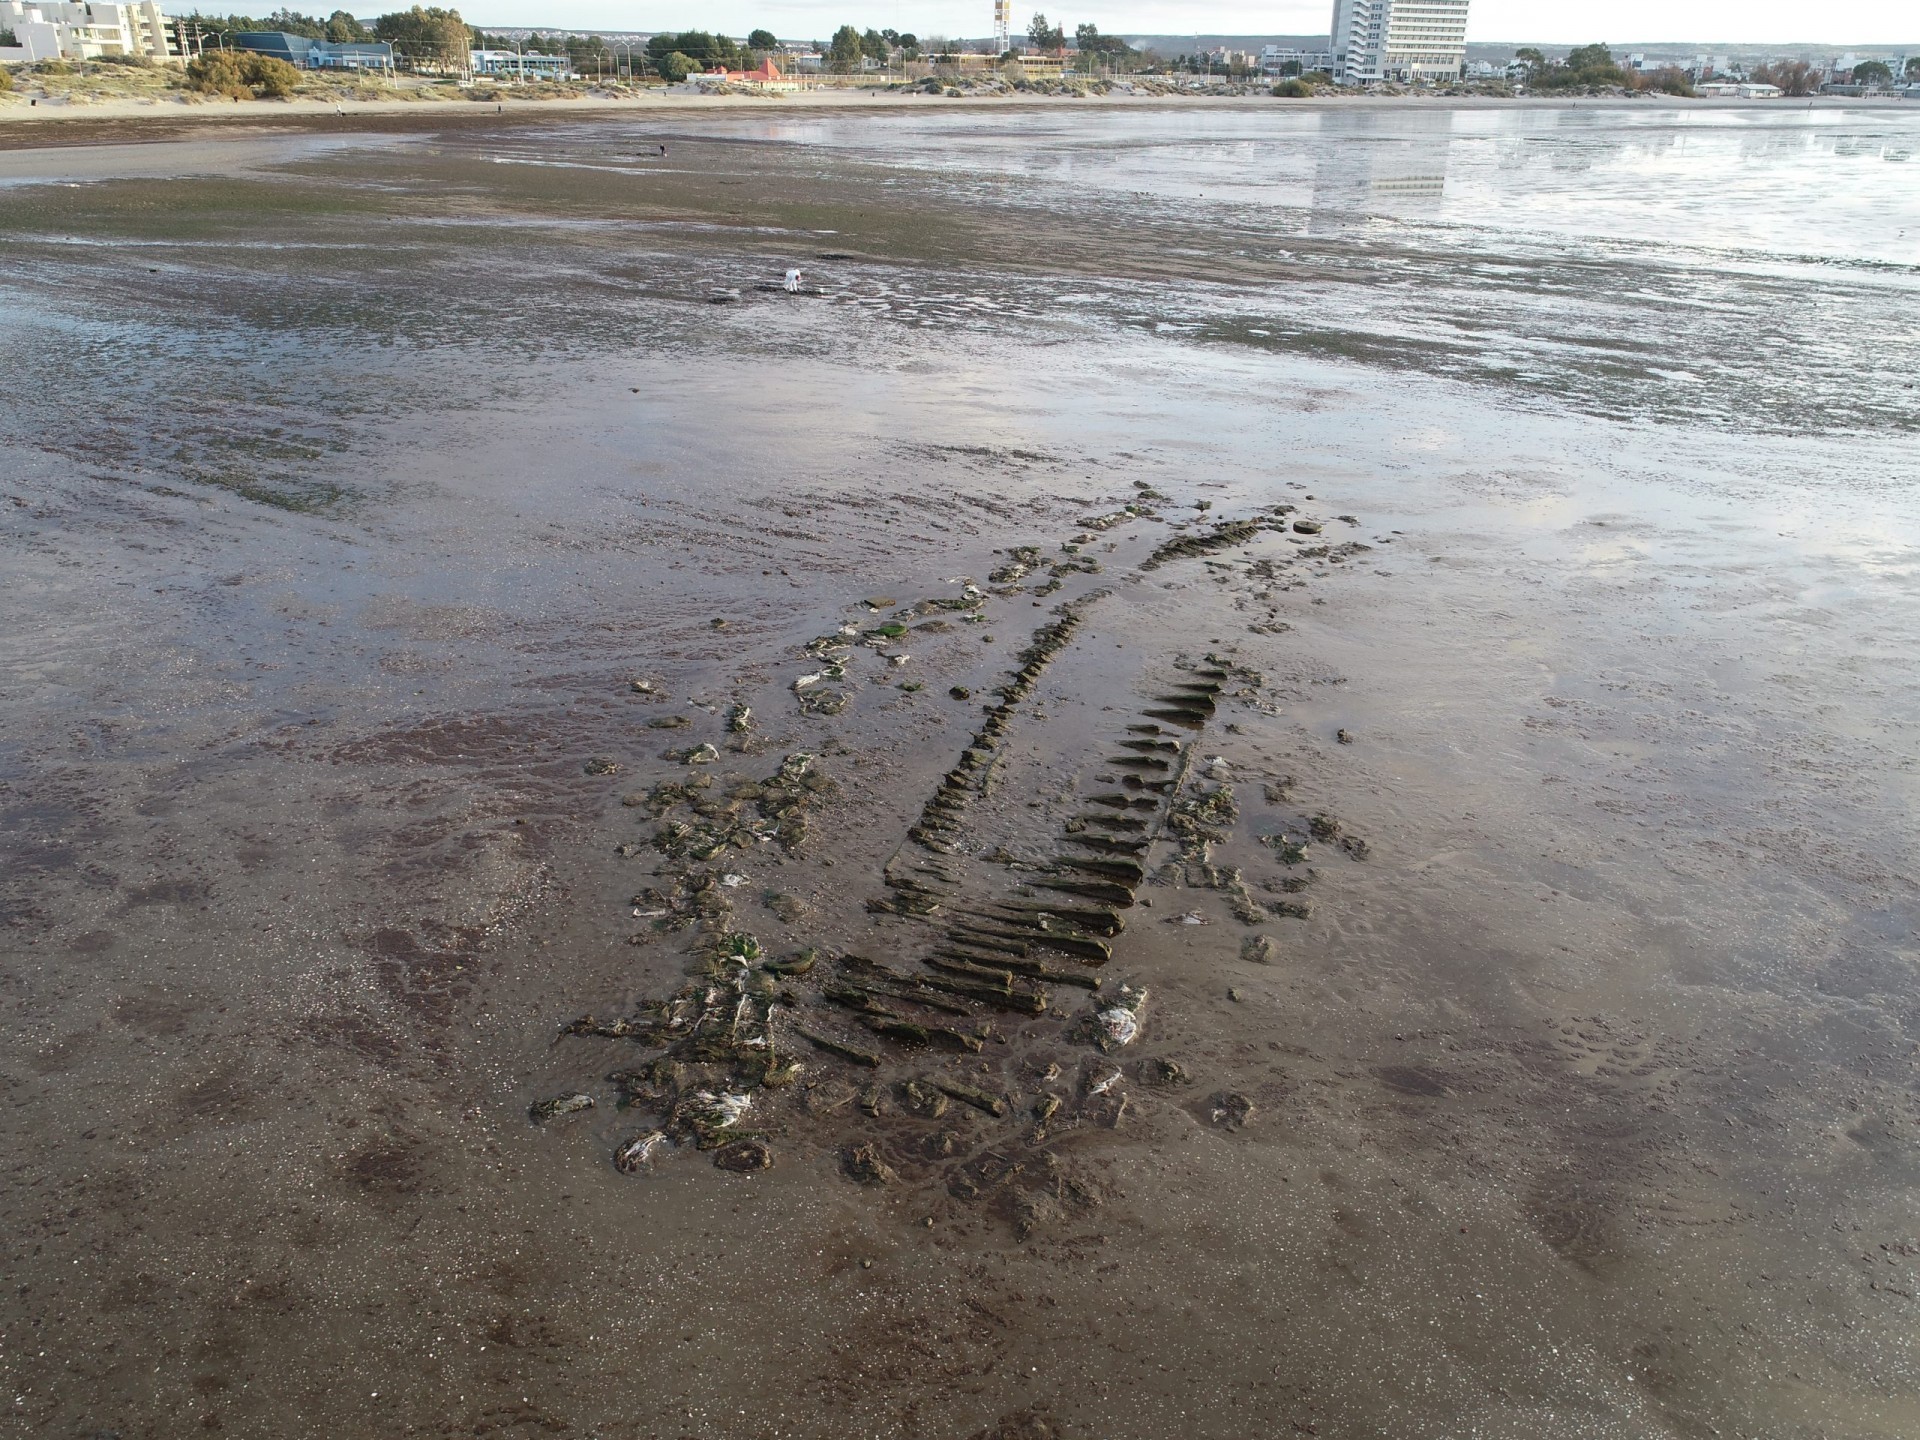 The wreck of a ship thought to be the 19th-century Rhode Island whaler Dolphin at low tide off Puerto Madryn, Argentina. (U. Sokolowicz)